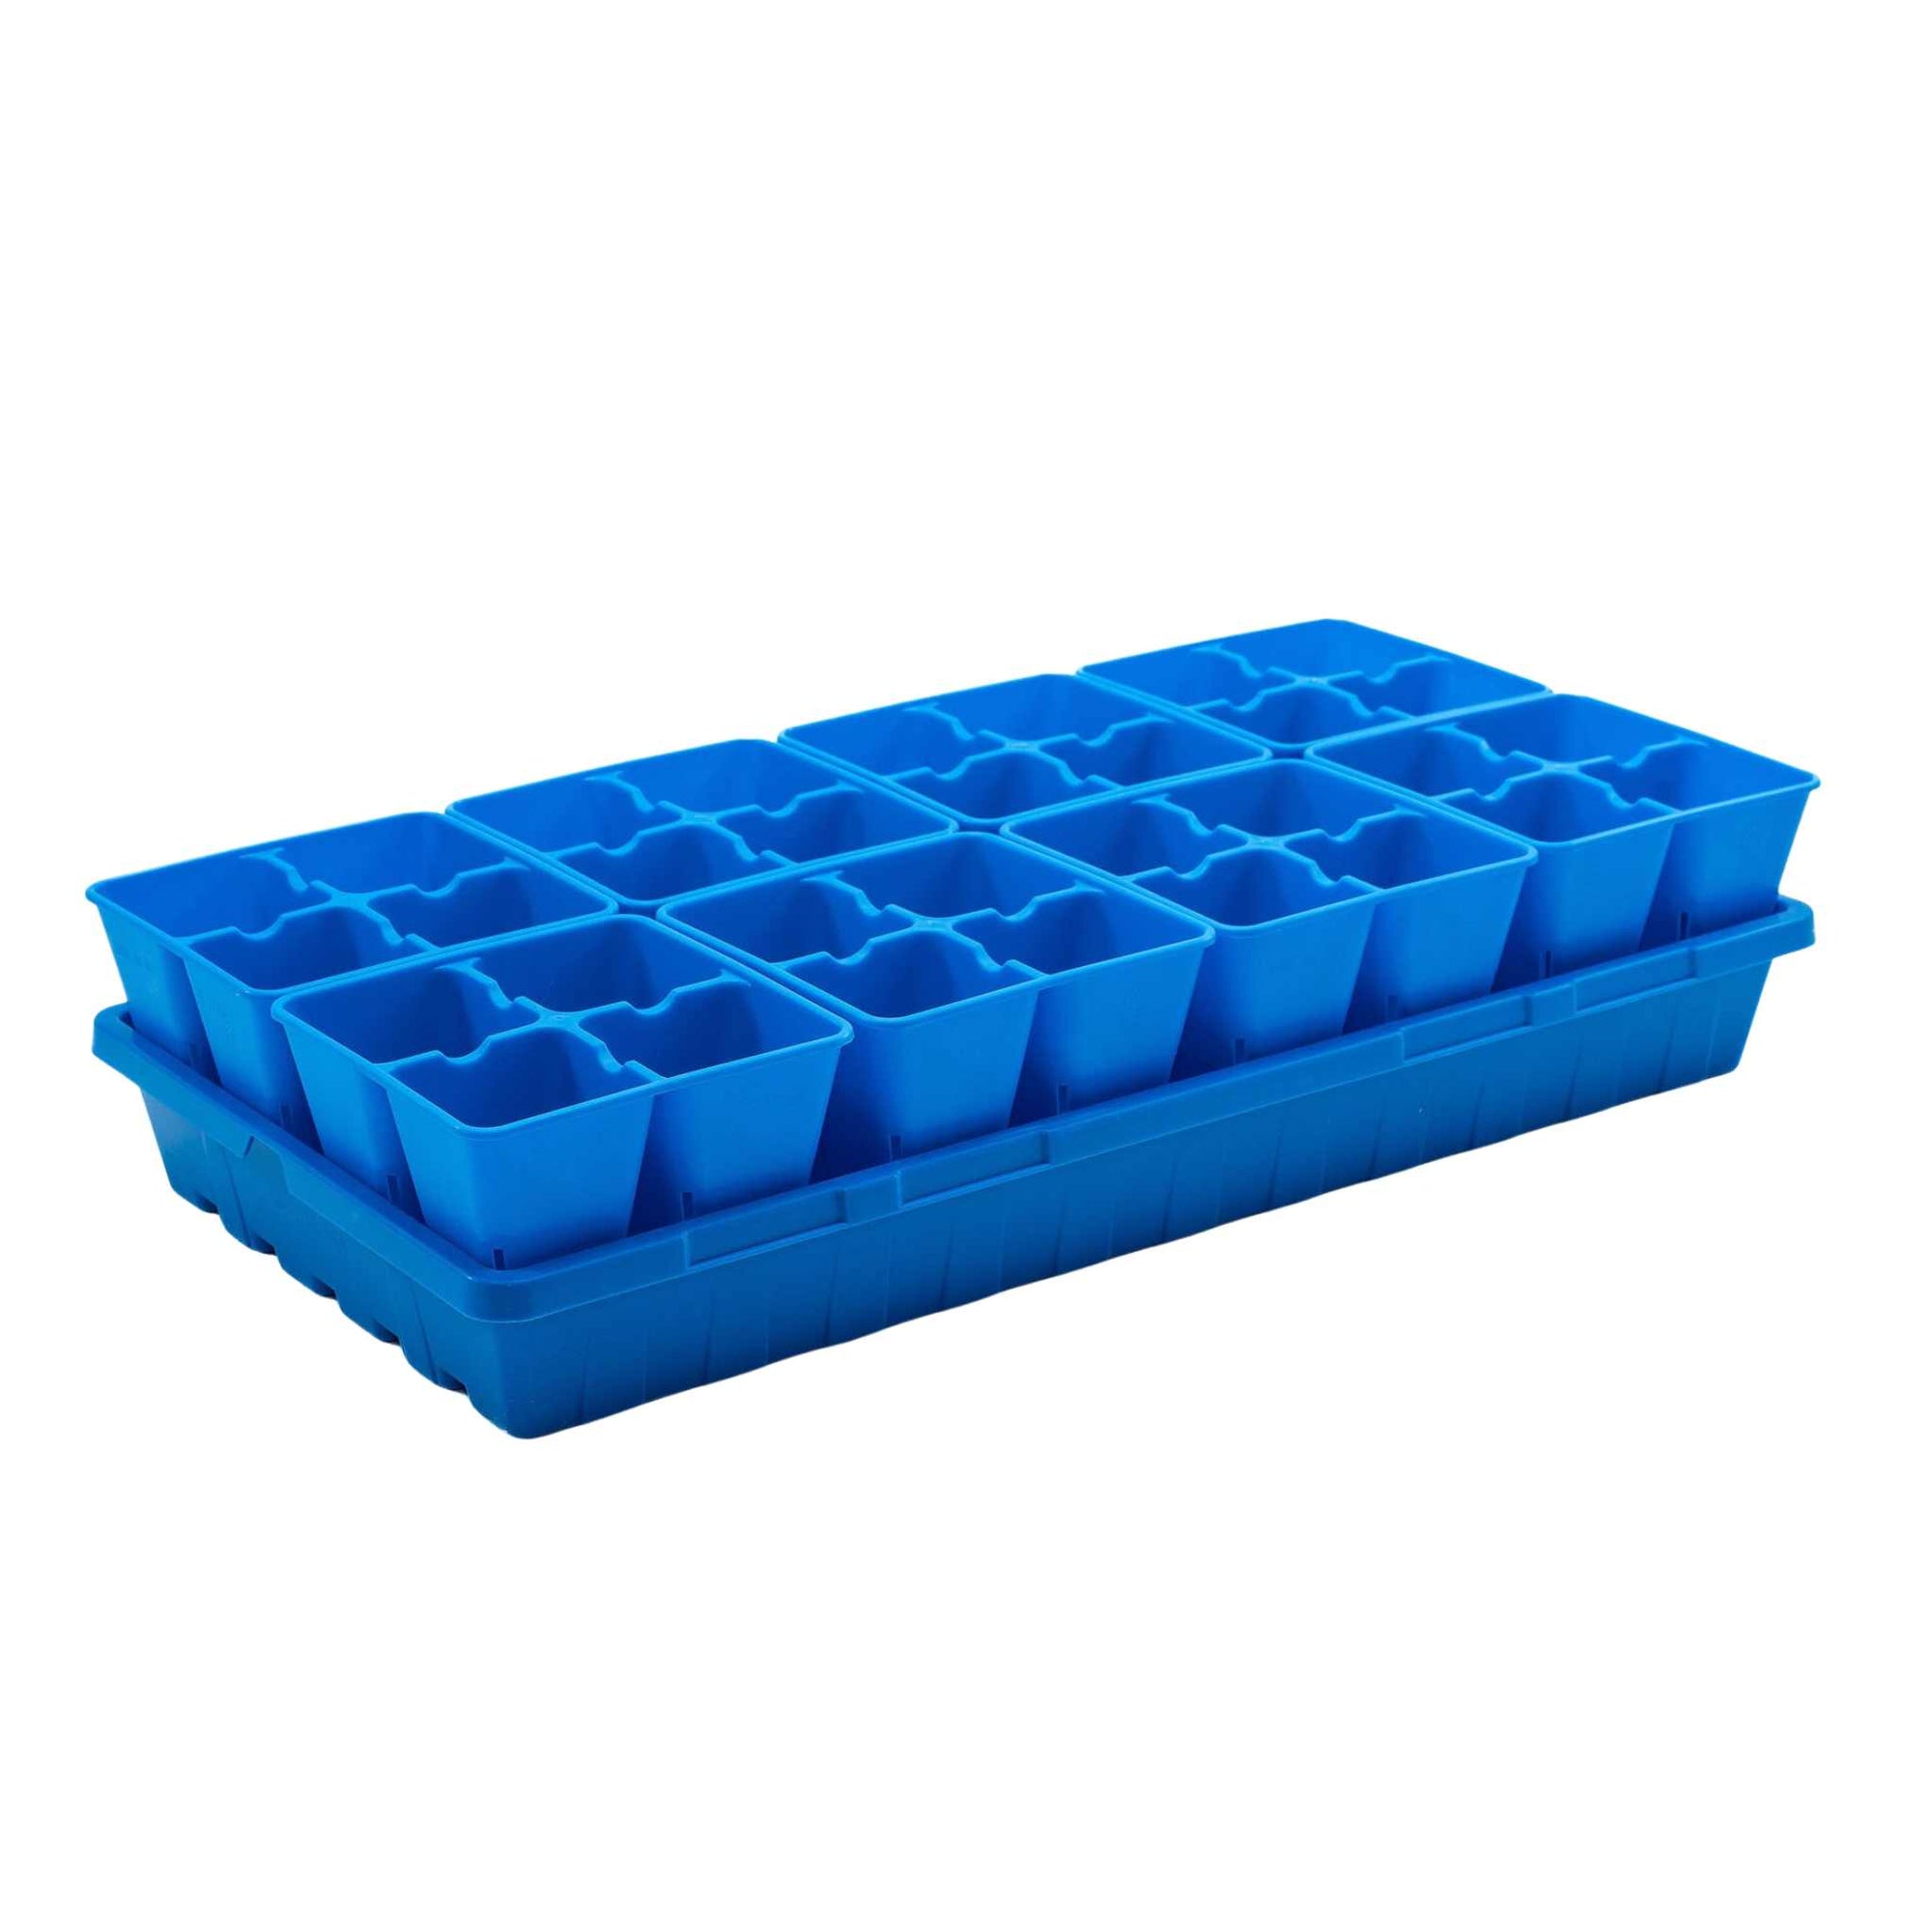 Blue 4 Cells in a 1020 Blue Tray